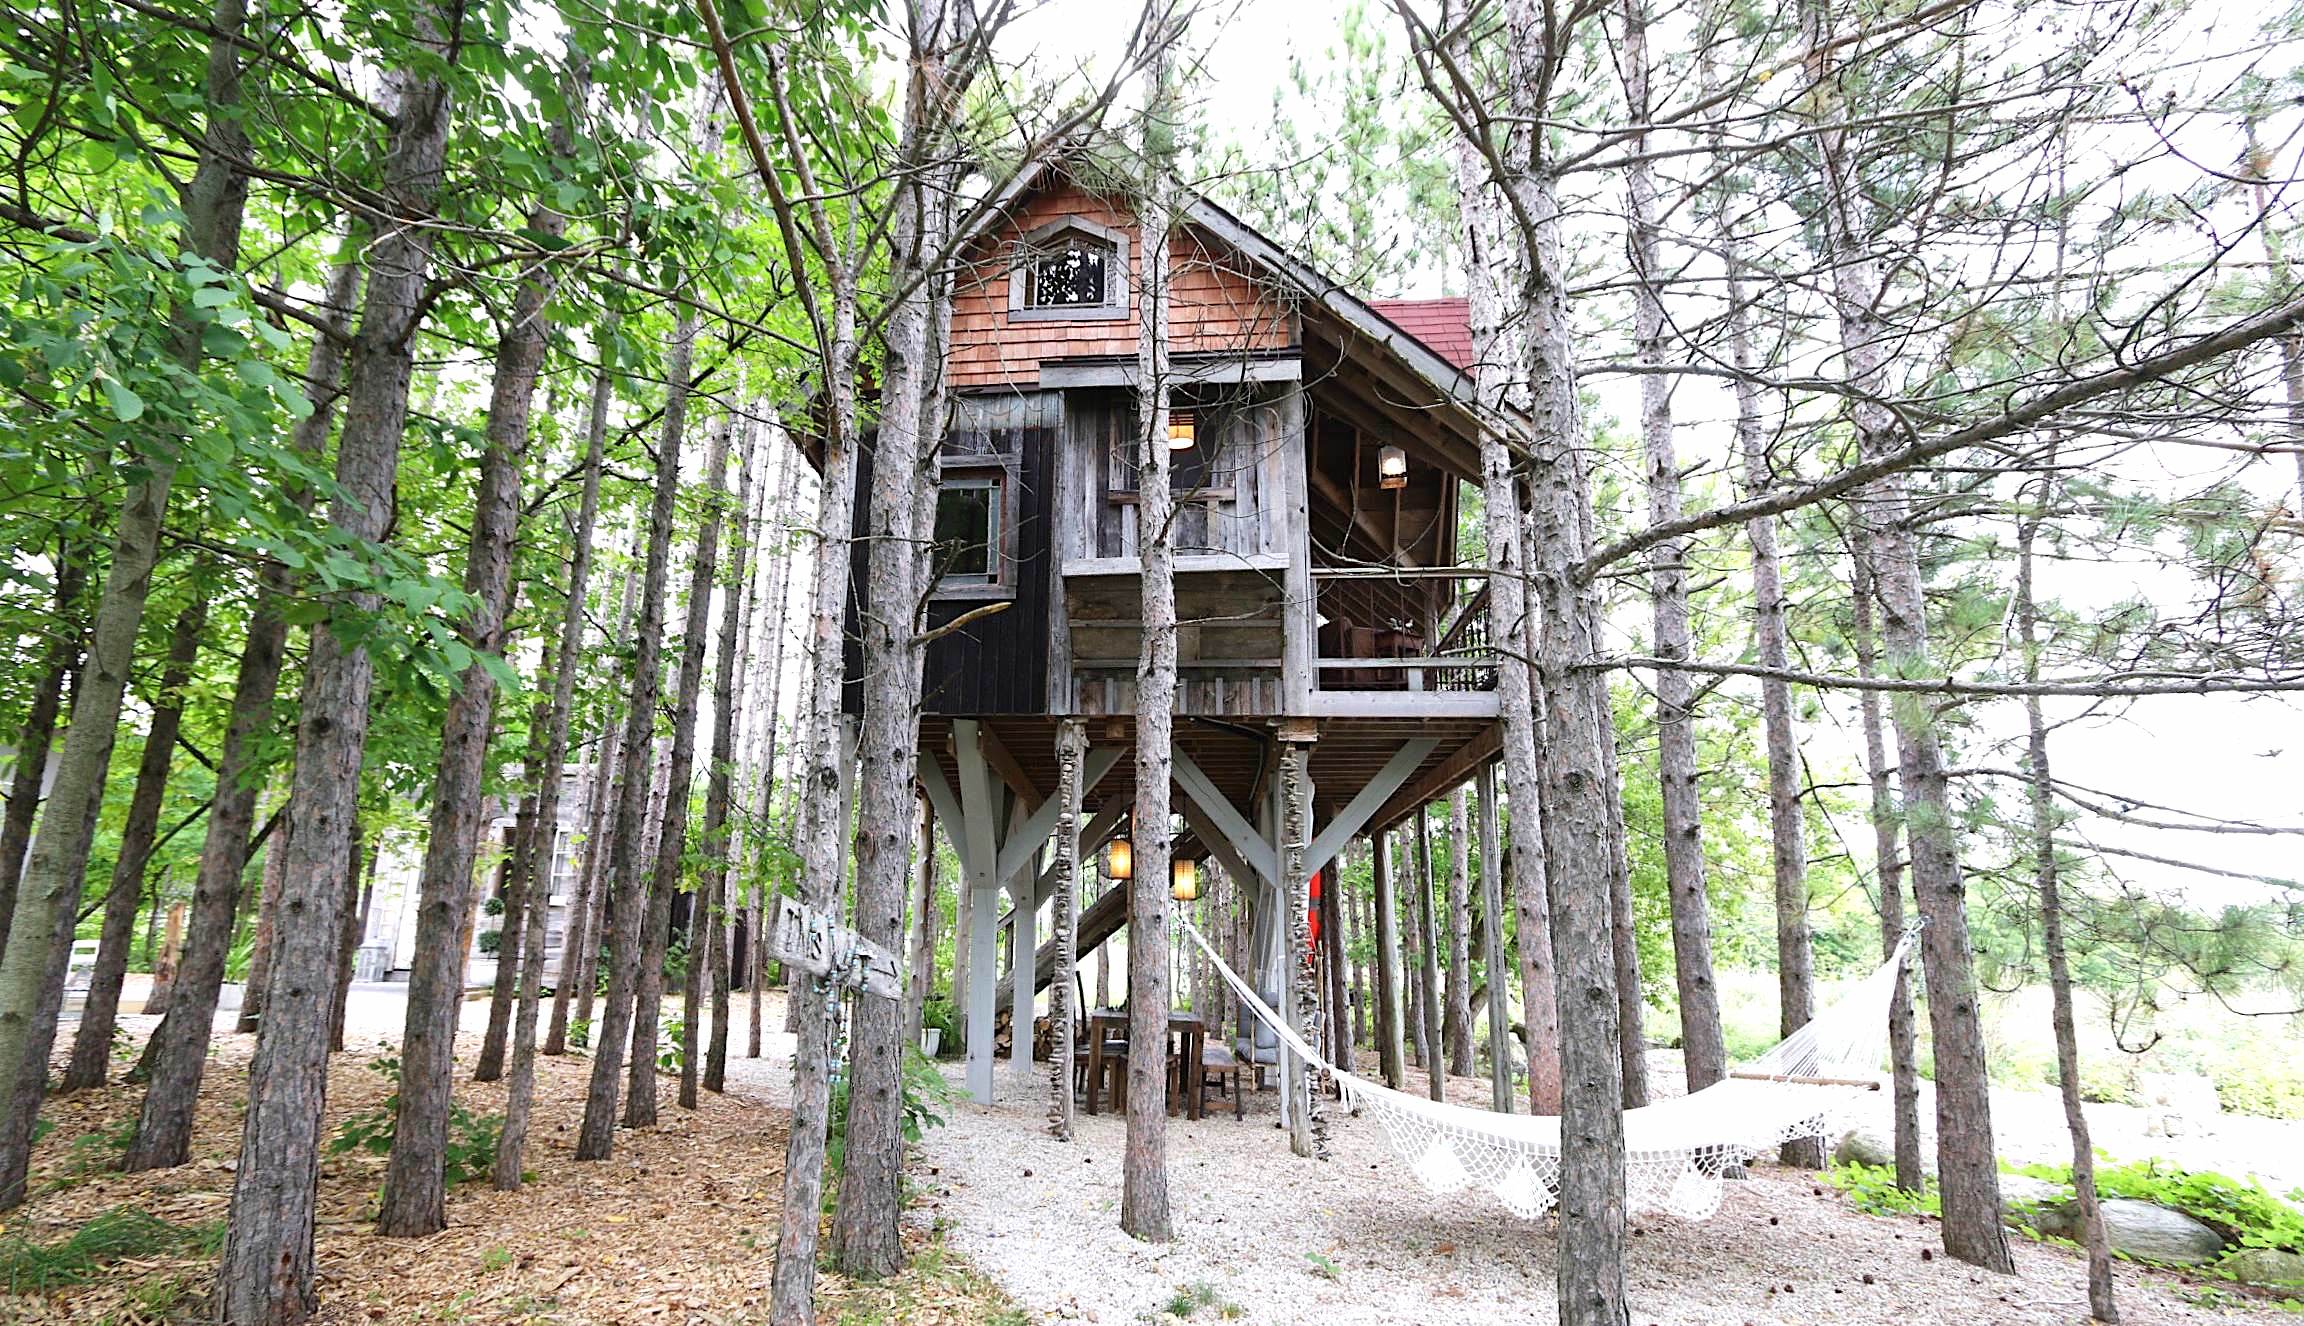 Treehouse Retreat Vacation Rental. Listed as one of the most amazing treehouses in the world.| DESIGN THE LIFE YOU WANT TO LIVE | LYNNE KNOWLTON